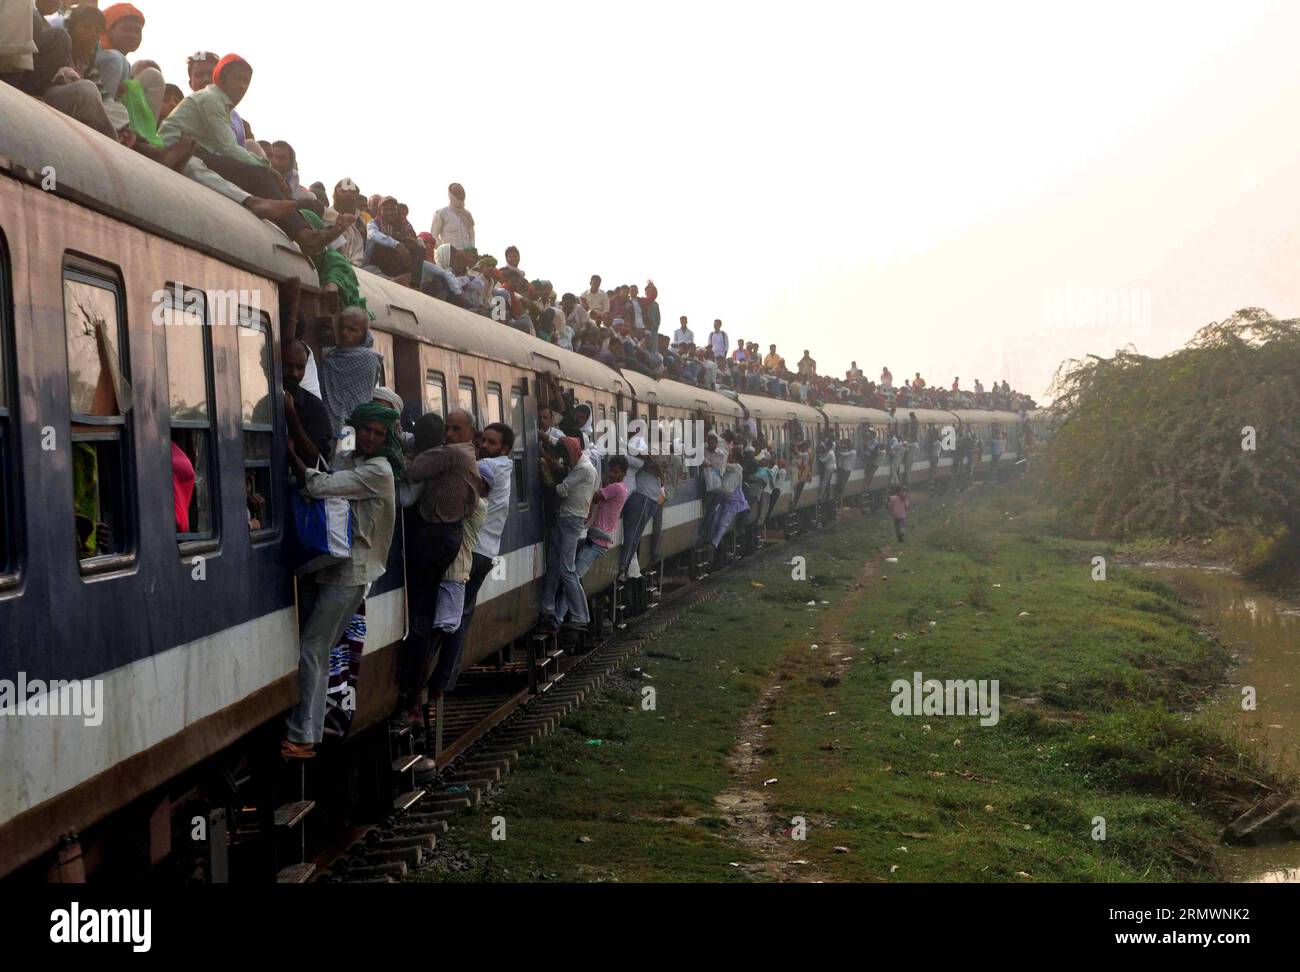 (141106) -- PATNA,  Nov. 6, 2014 -- Photo taken on Nov. 6, 2014 shows an overcrowded passenger train passing through Patna city, India. The train is overcrowded because people are coming to have a dip in the holy river Ganga for Kartik Purnima festival. Devotees sail fancy boats carrying earthen lamps, coins and flowers to celebrate Kartik Purnima festival on the end day of the holy month Kartik. )(bxq) INDIA-PATNA-OVERCROWDED TRAIN-KARTIK PURNIMA FESTIVAL Stringer PUBLICATIONxNOTxINxCHN   Patna Nov 6 2014 Photo Taken ON Nov 6 2014 Shows to Overcrowded Passenger Train passing Through Patna Cit Stock Photo